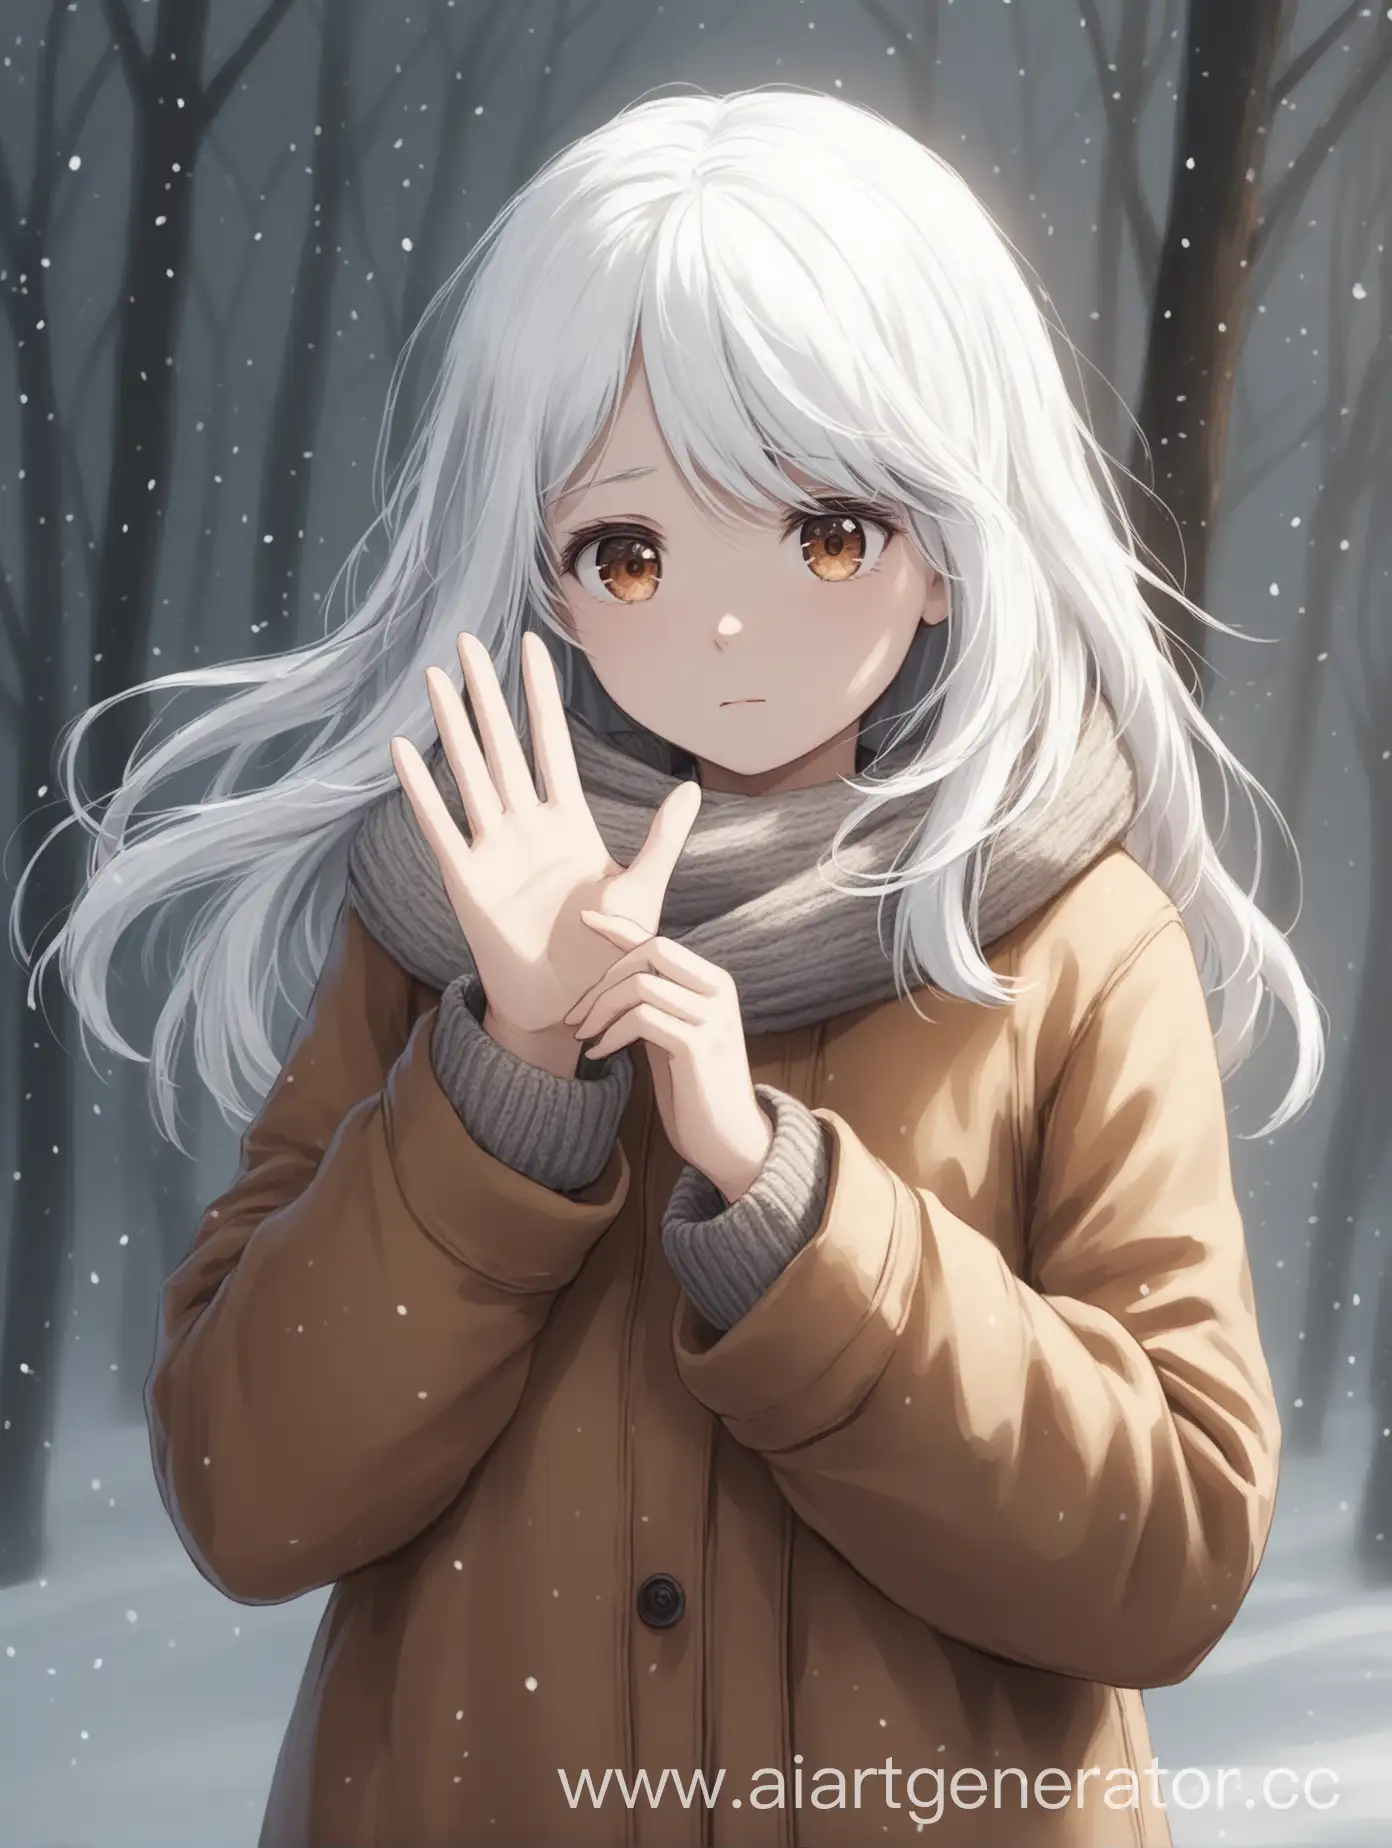 Shy-WhiteHaired-Girl-in-Cozy-Winter-Attire-Waving-Gently